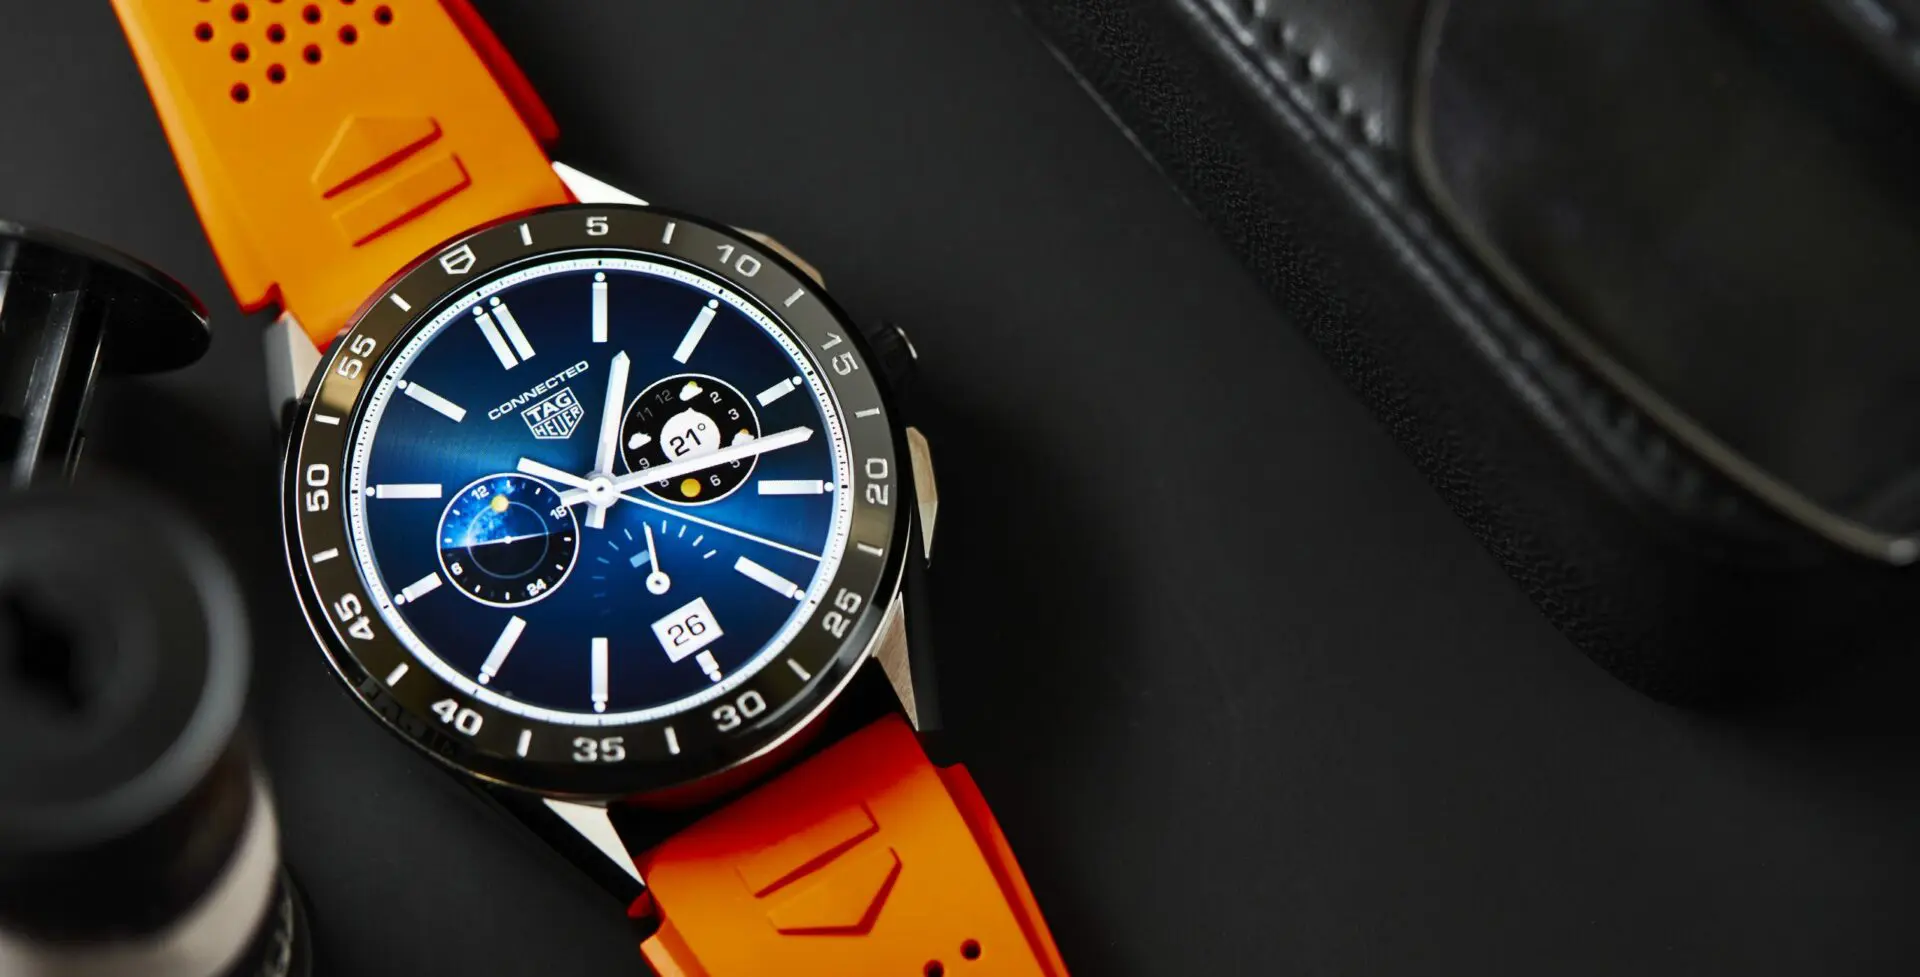 Video: TAG Heuer Connected Watch